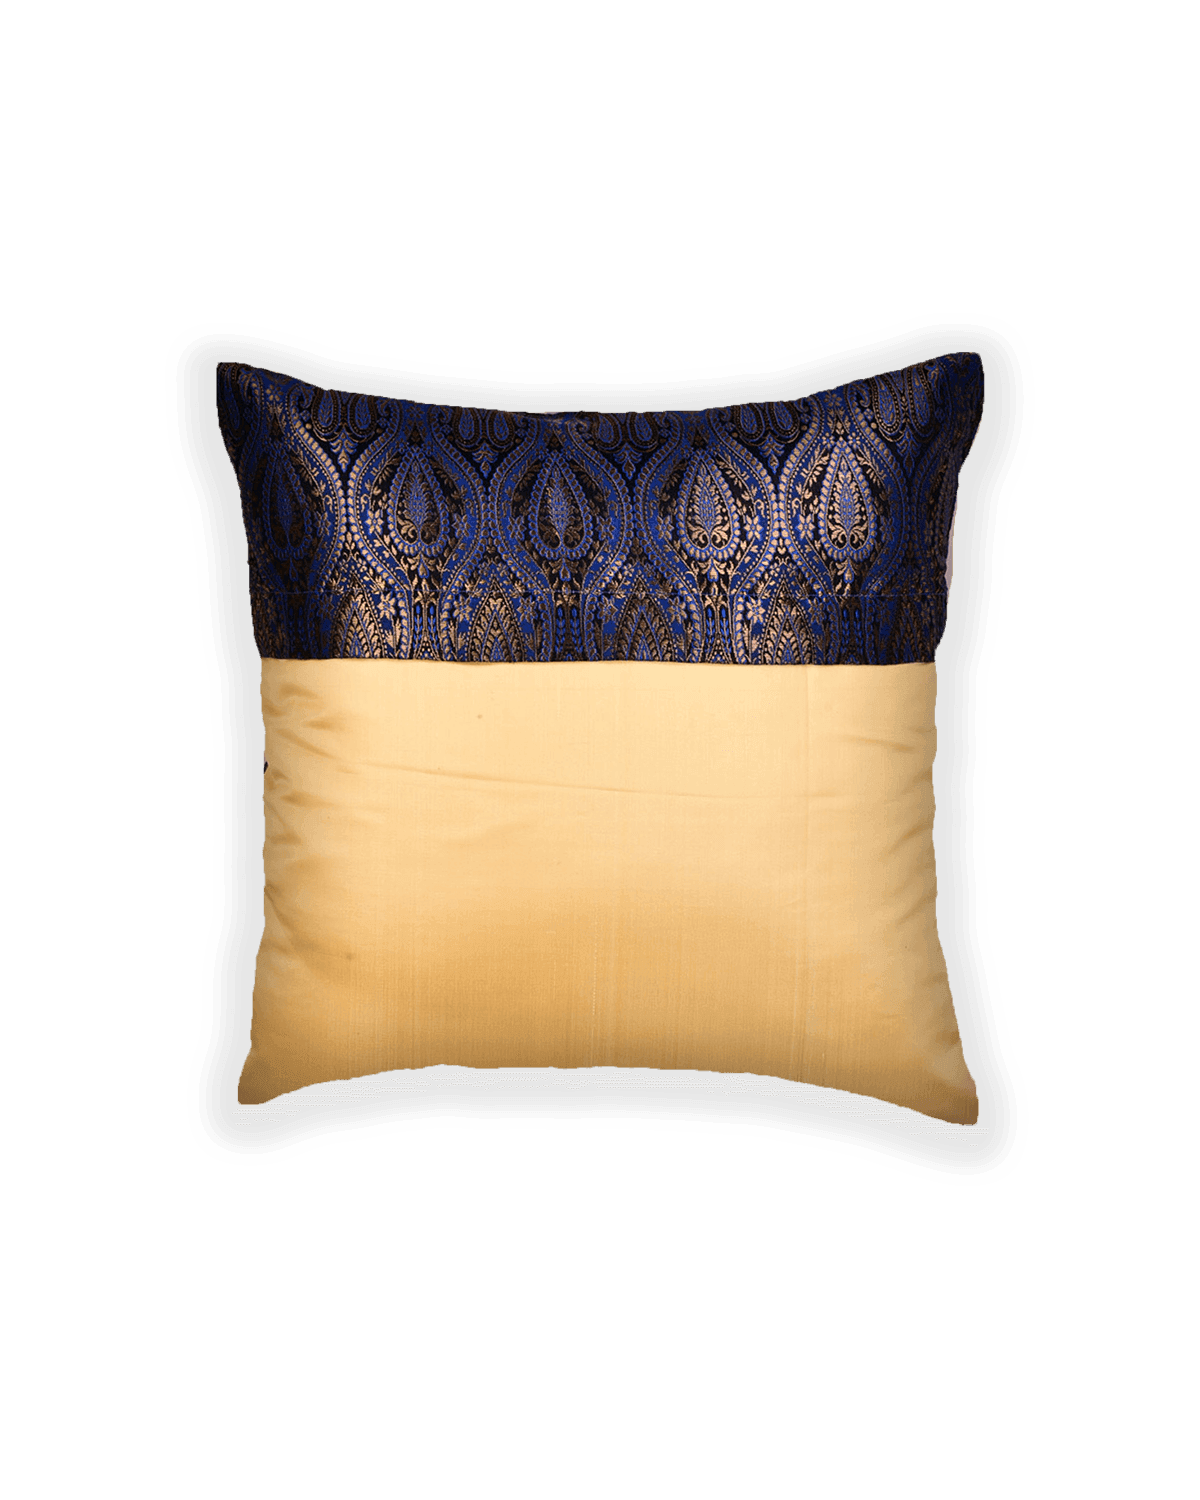 Blue Zari Brocade Woven Poly Silk Cushion Cover with Satin Back 16" - By HolyWeaves, Benares